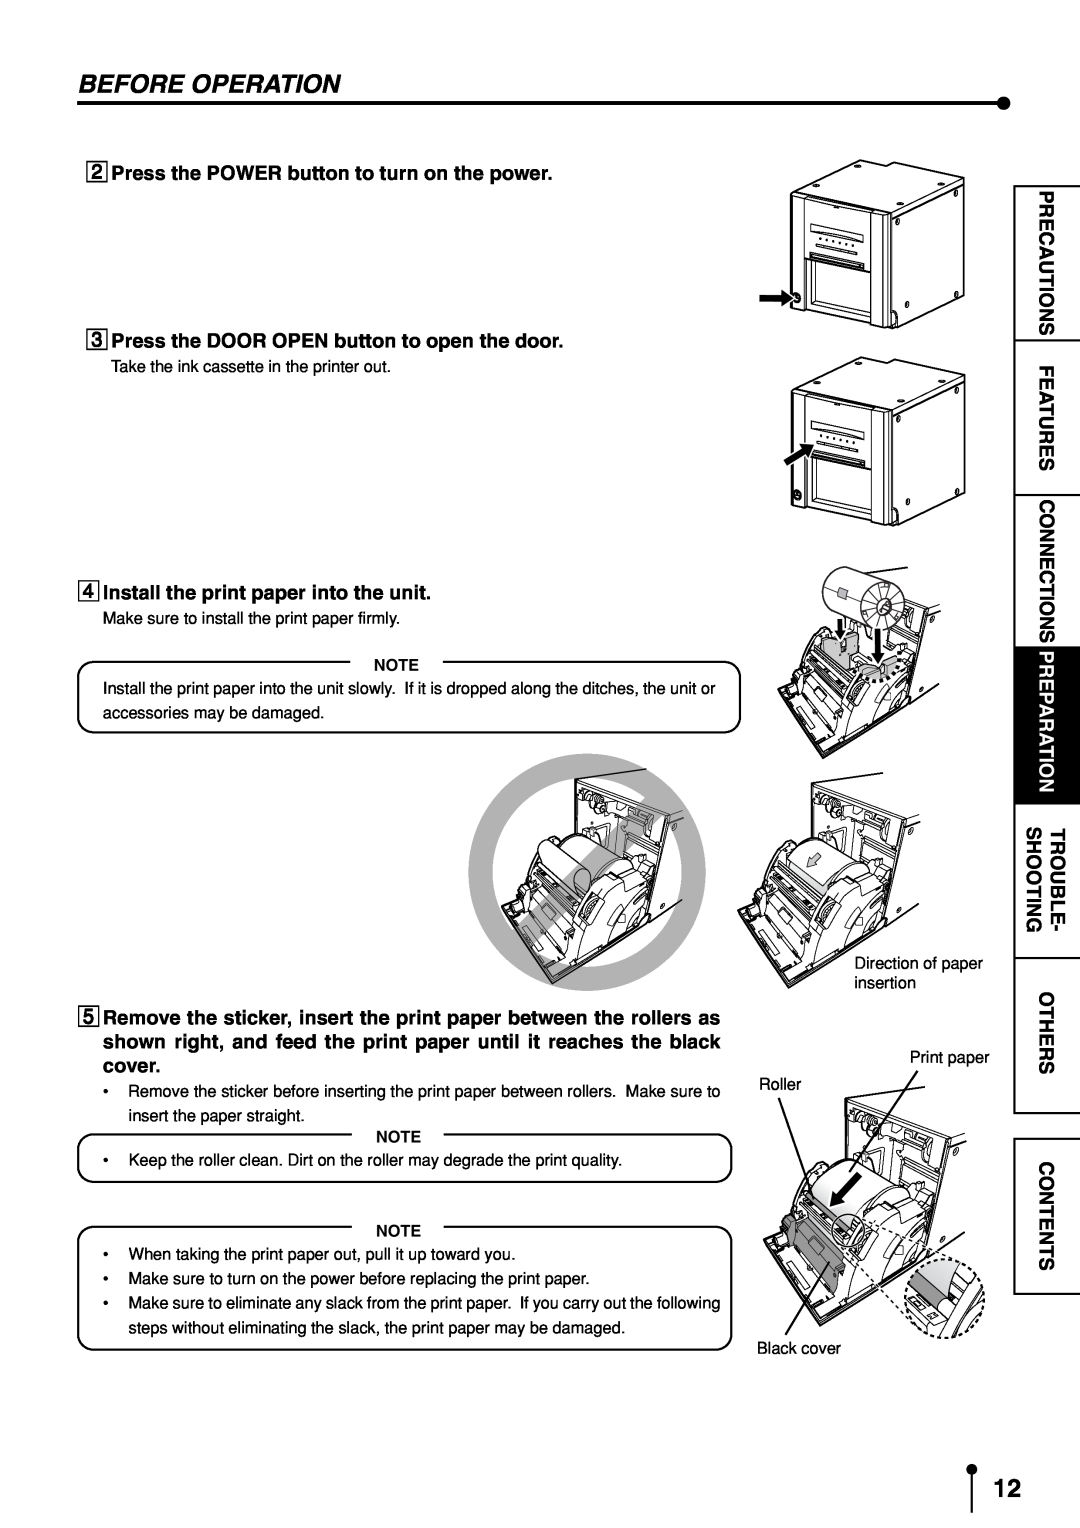 Mitsubishi Electronics CP9600DW-S operation manual Before Operation, Press the POWER button to turn on the power, Contents 